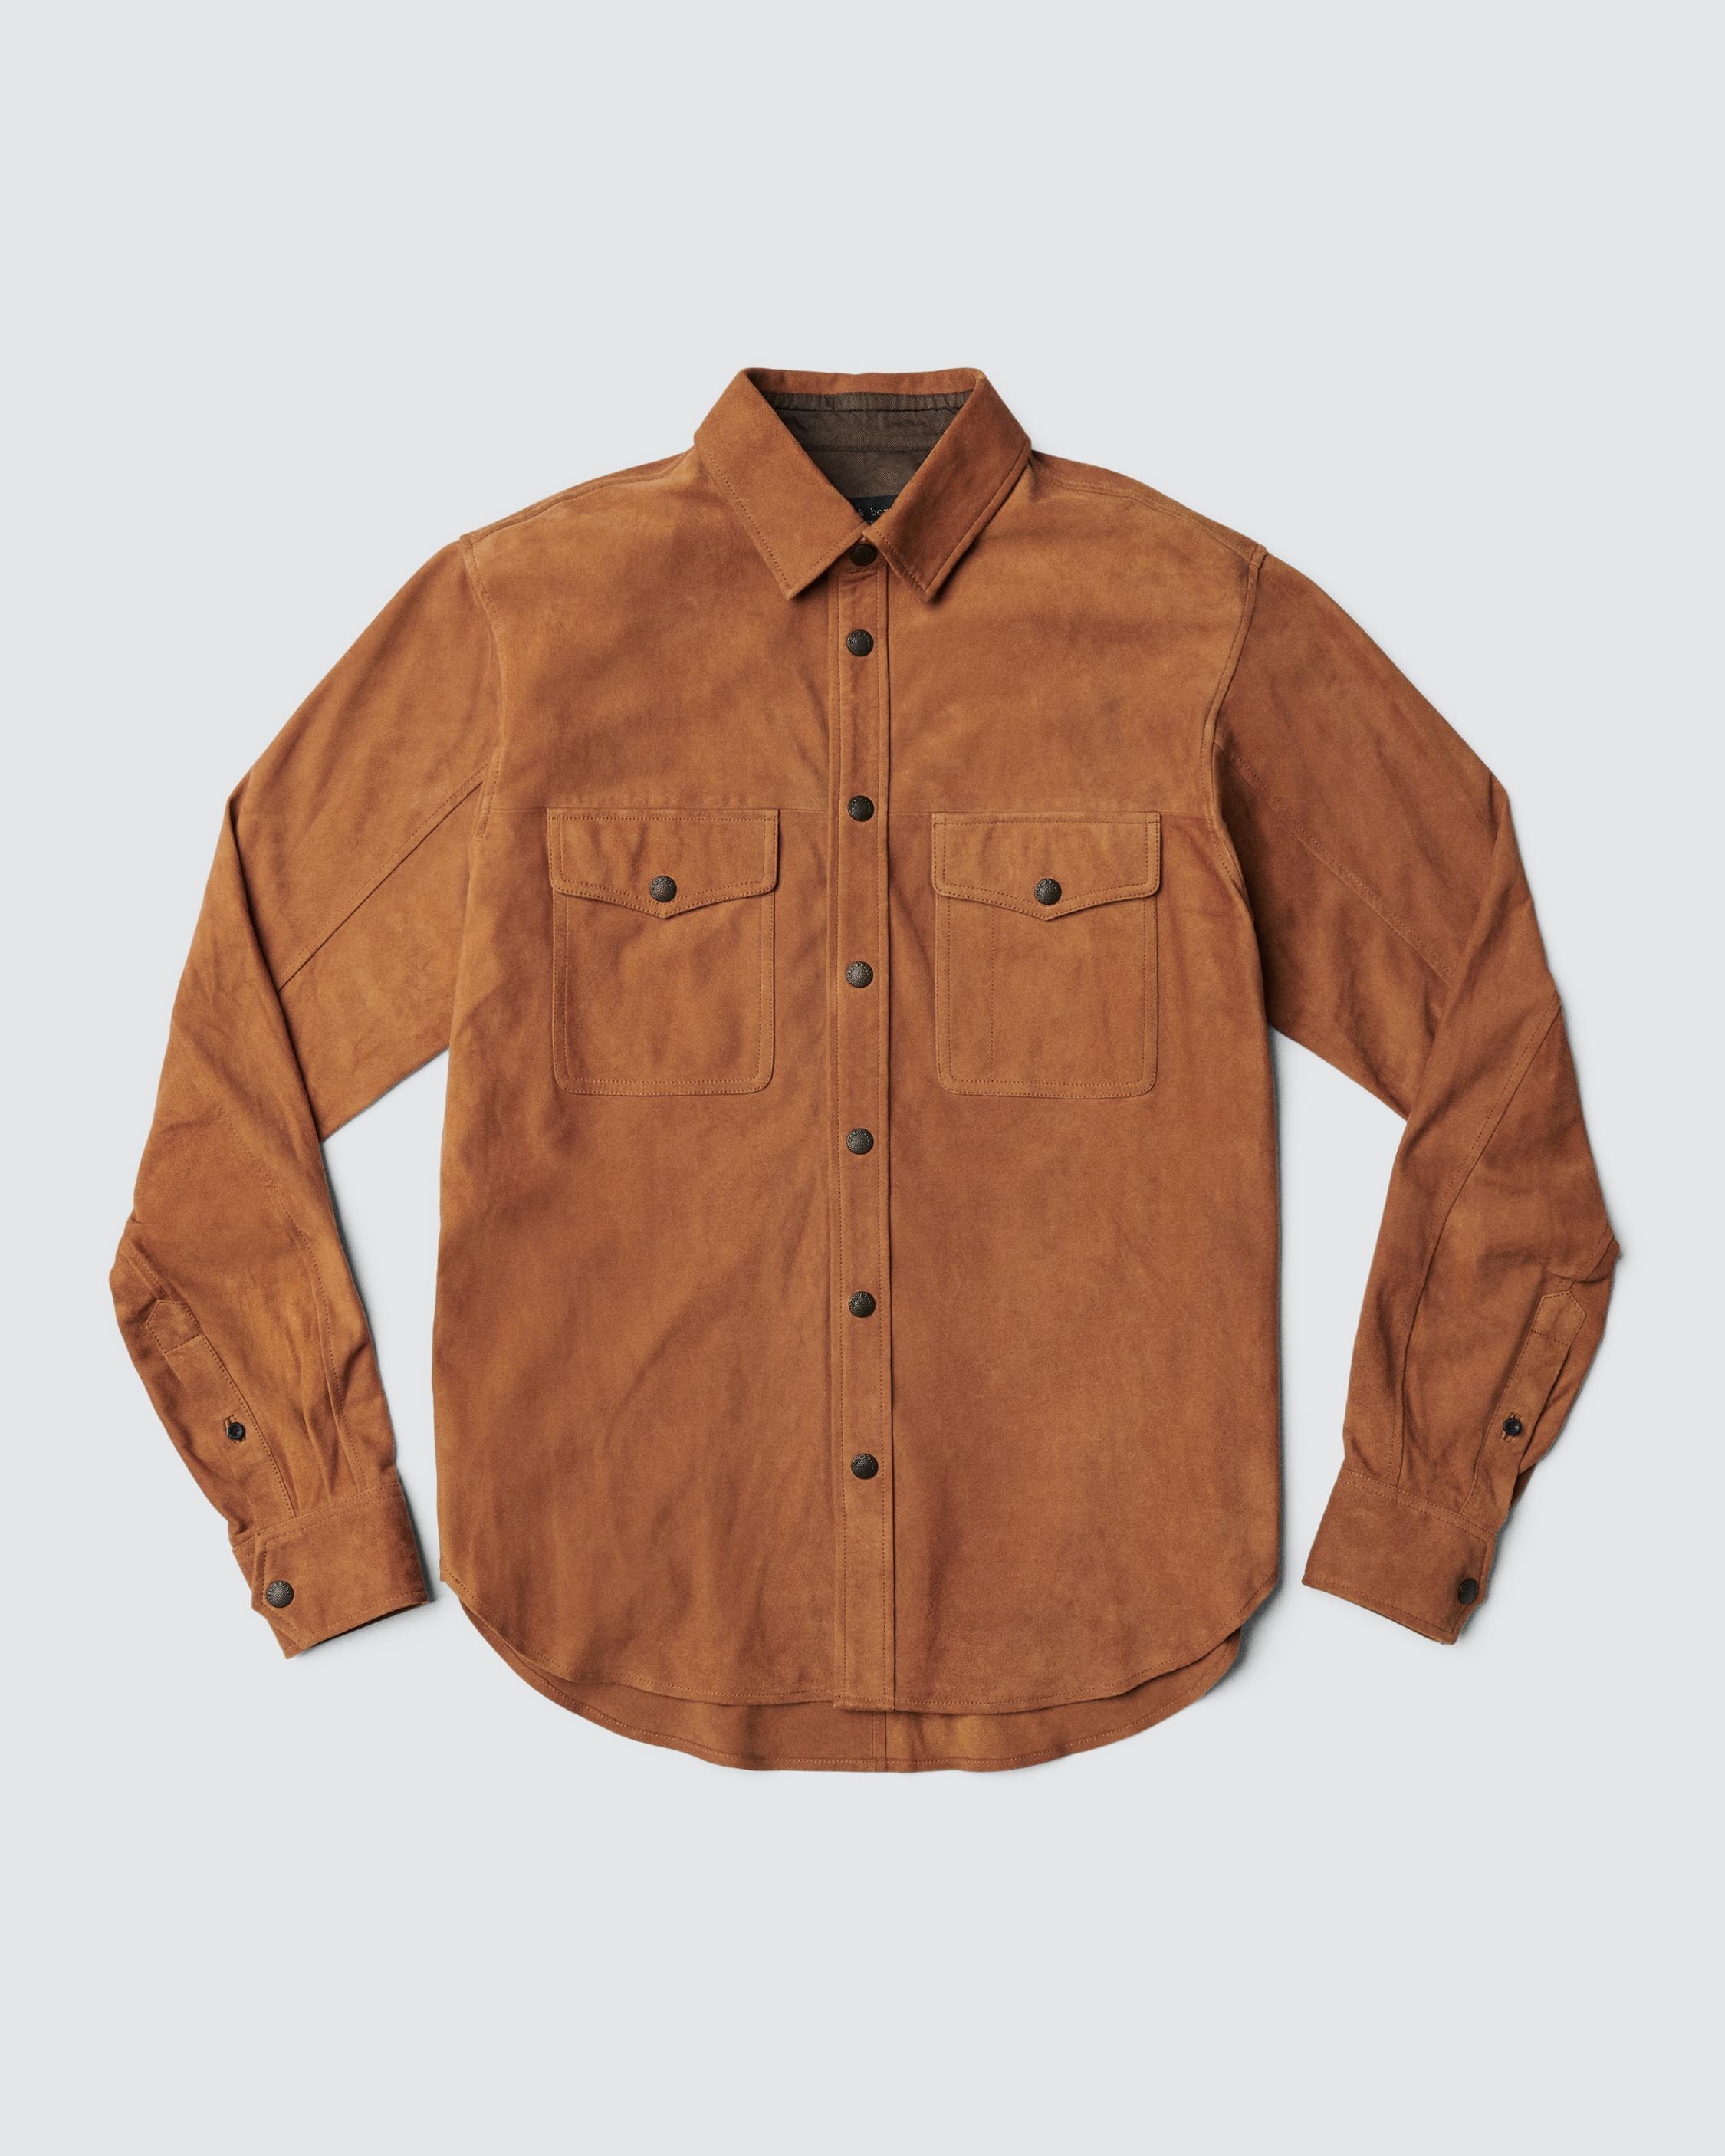 Engineered Jack Suede Shirt
Relaxed Fit Button Down Shirt - 1